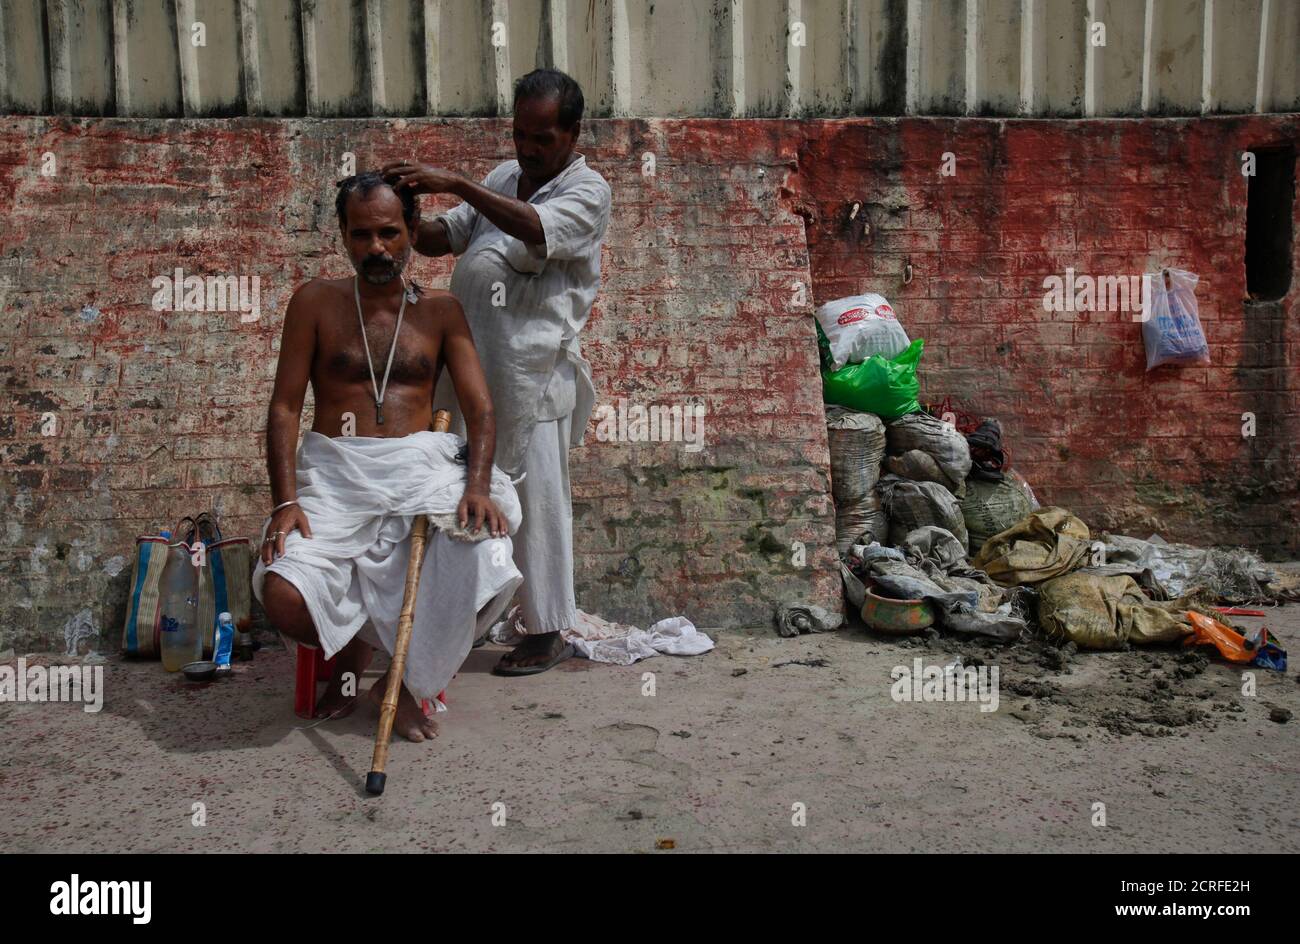 Shibdas, 38, has his head shaved by a barber on the banks of the Ganges river, as part of a Hindu ritual after his father died, in Kolkata September 3, 2011. Many Hindus come to Babughat, a set of bathing steps in Kolkata, to have their heads shaved and to take a dip in the waters as part of the final rites for the deceased.  REUTERS/Vivek Prakash (INDIA - Tags: SOCIETY RELIGION) Stock Photo